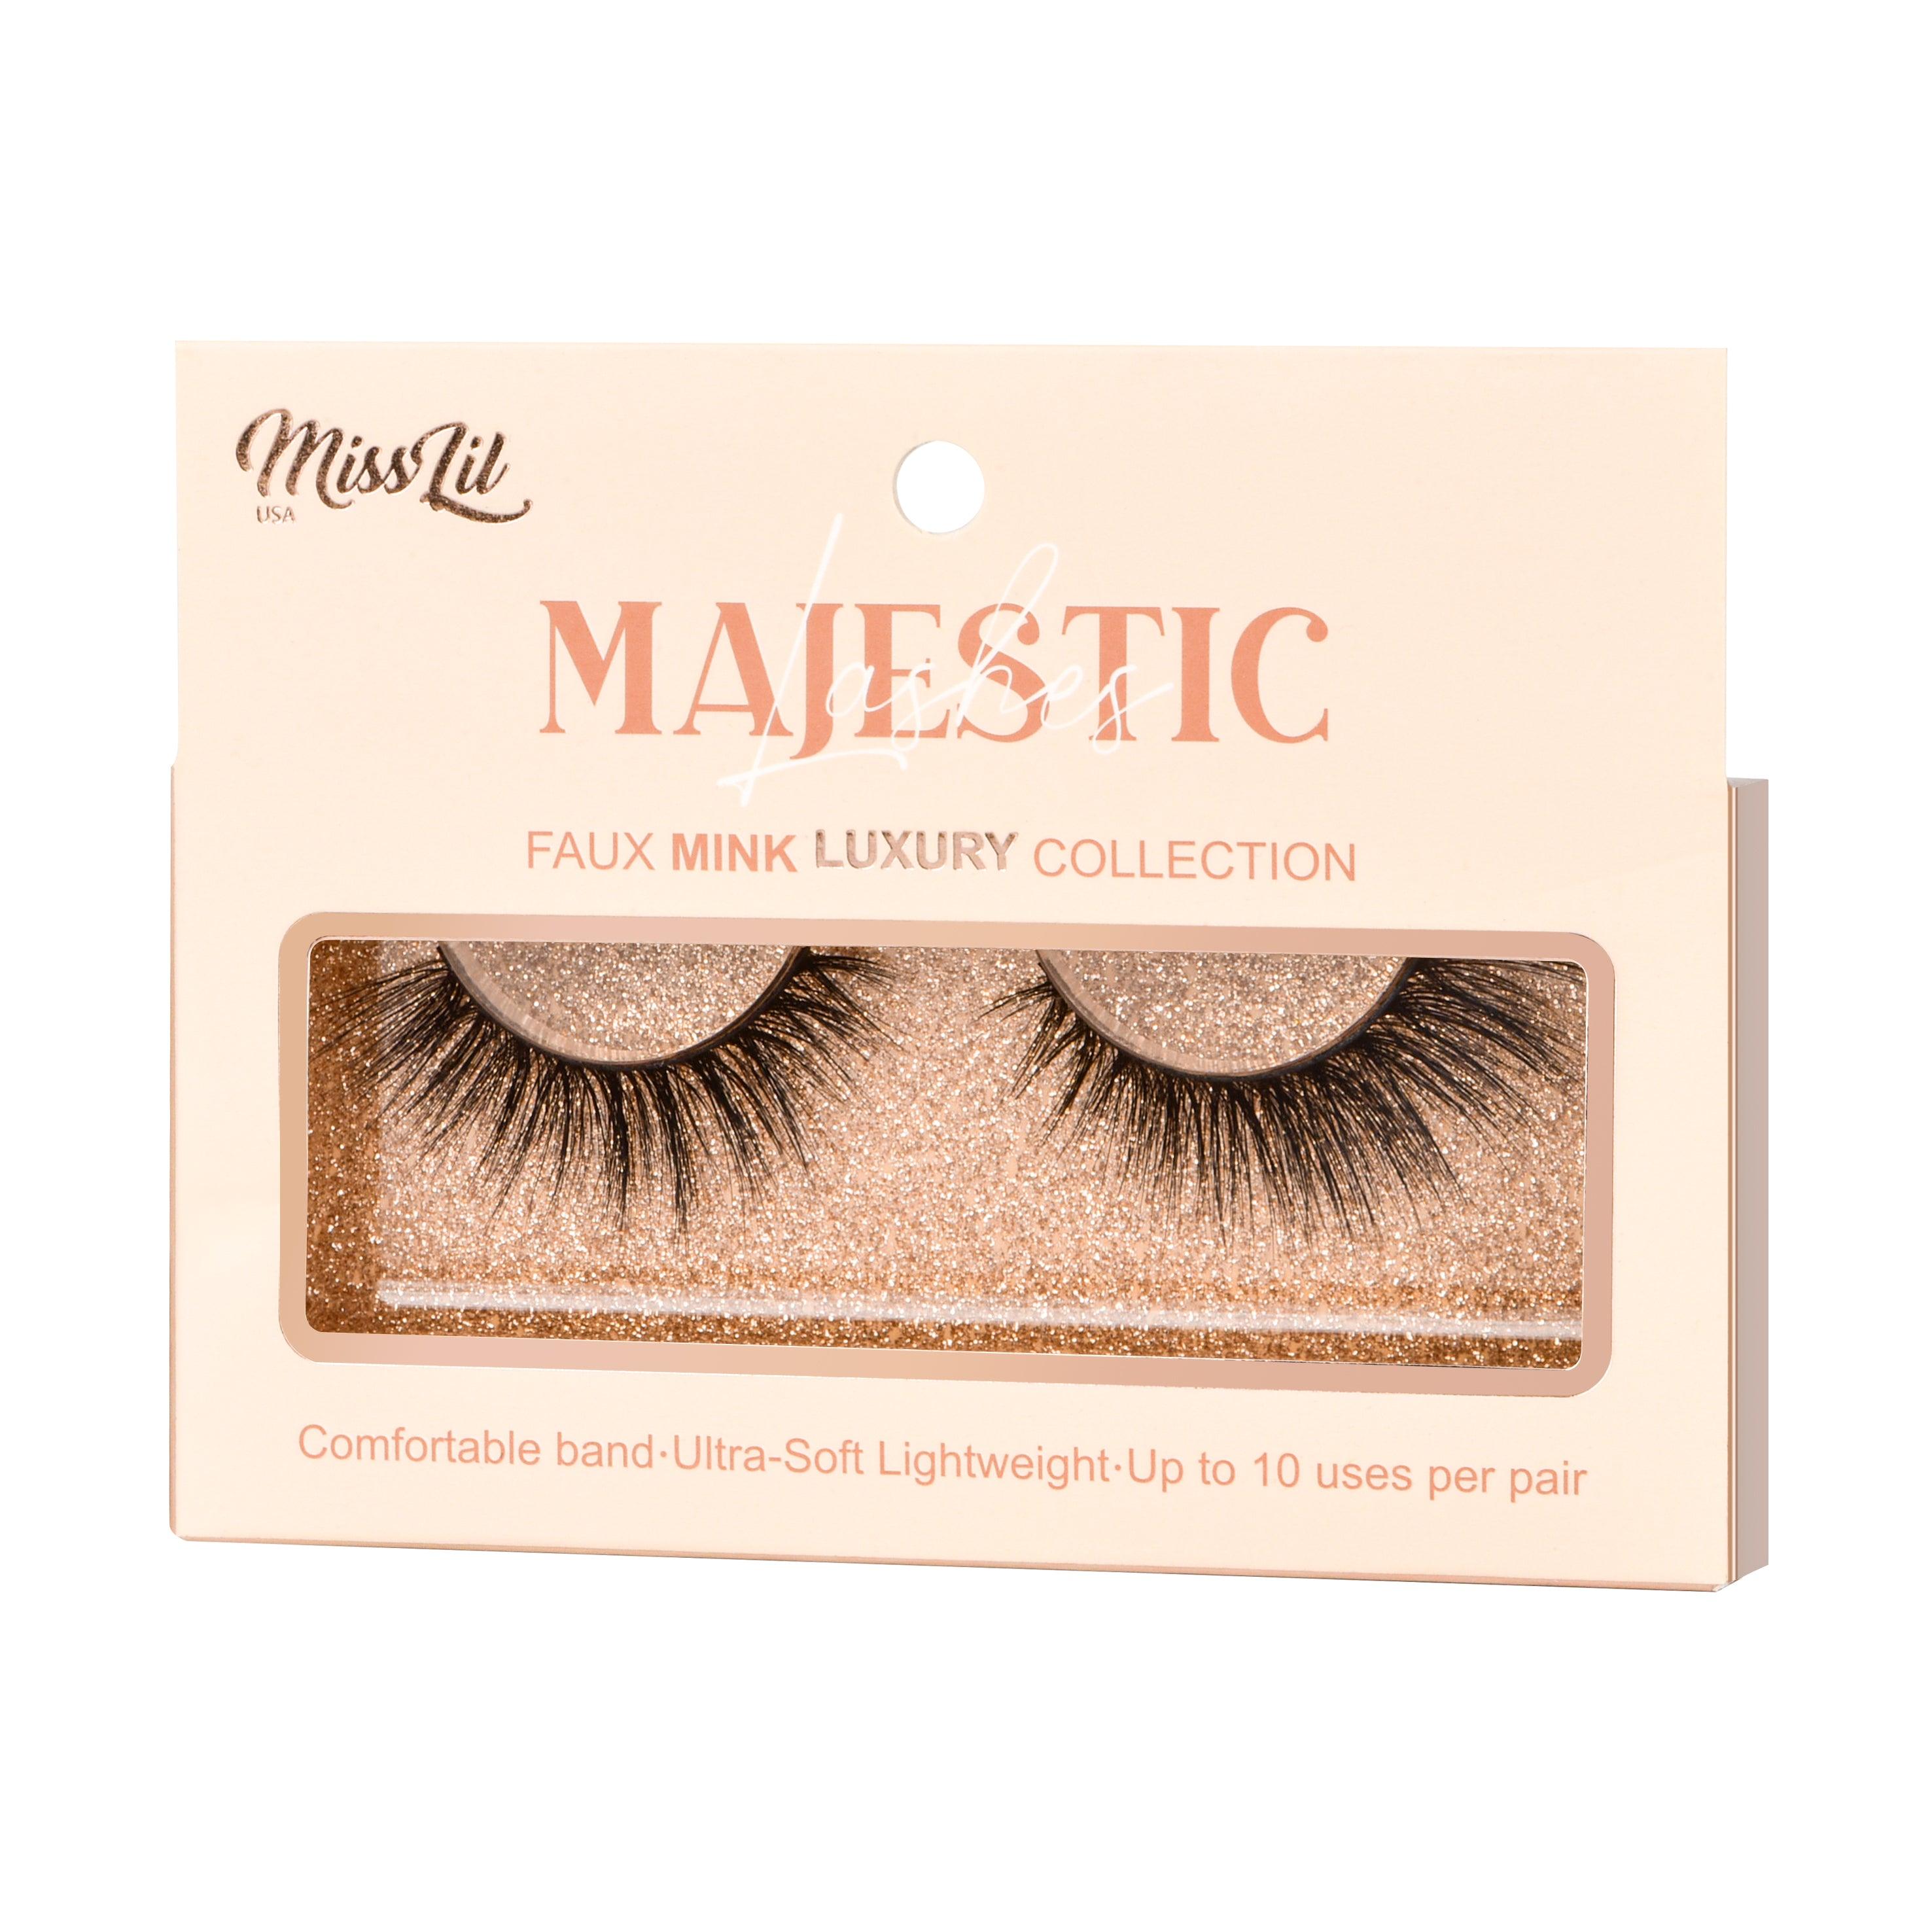 1-PAIR LASHES-MAJESTIC COLLECTION #26 (PACK OF 3) - Miss Lil USA